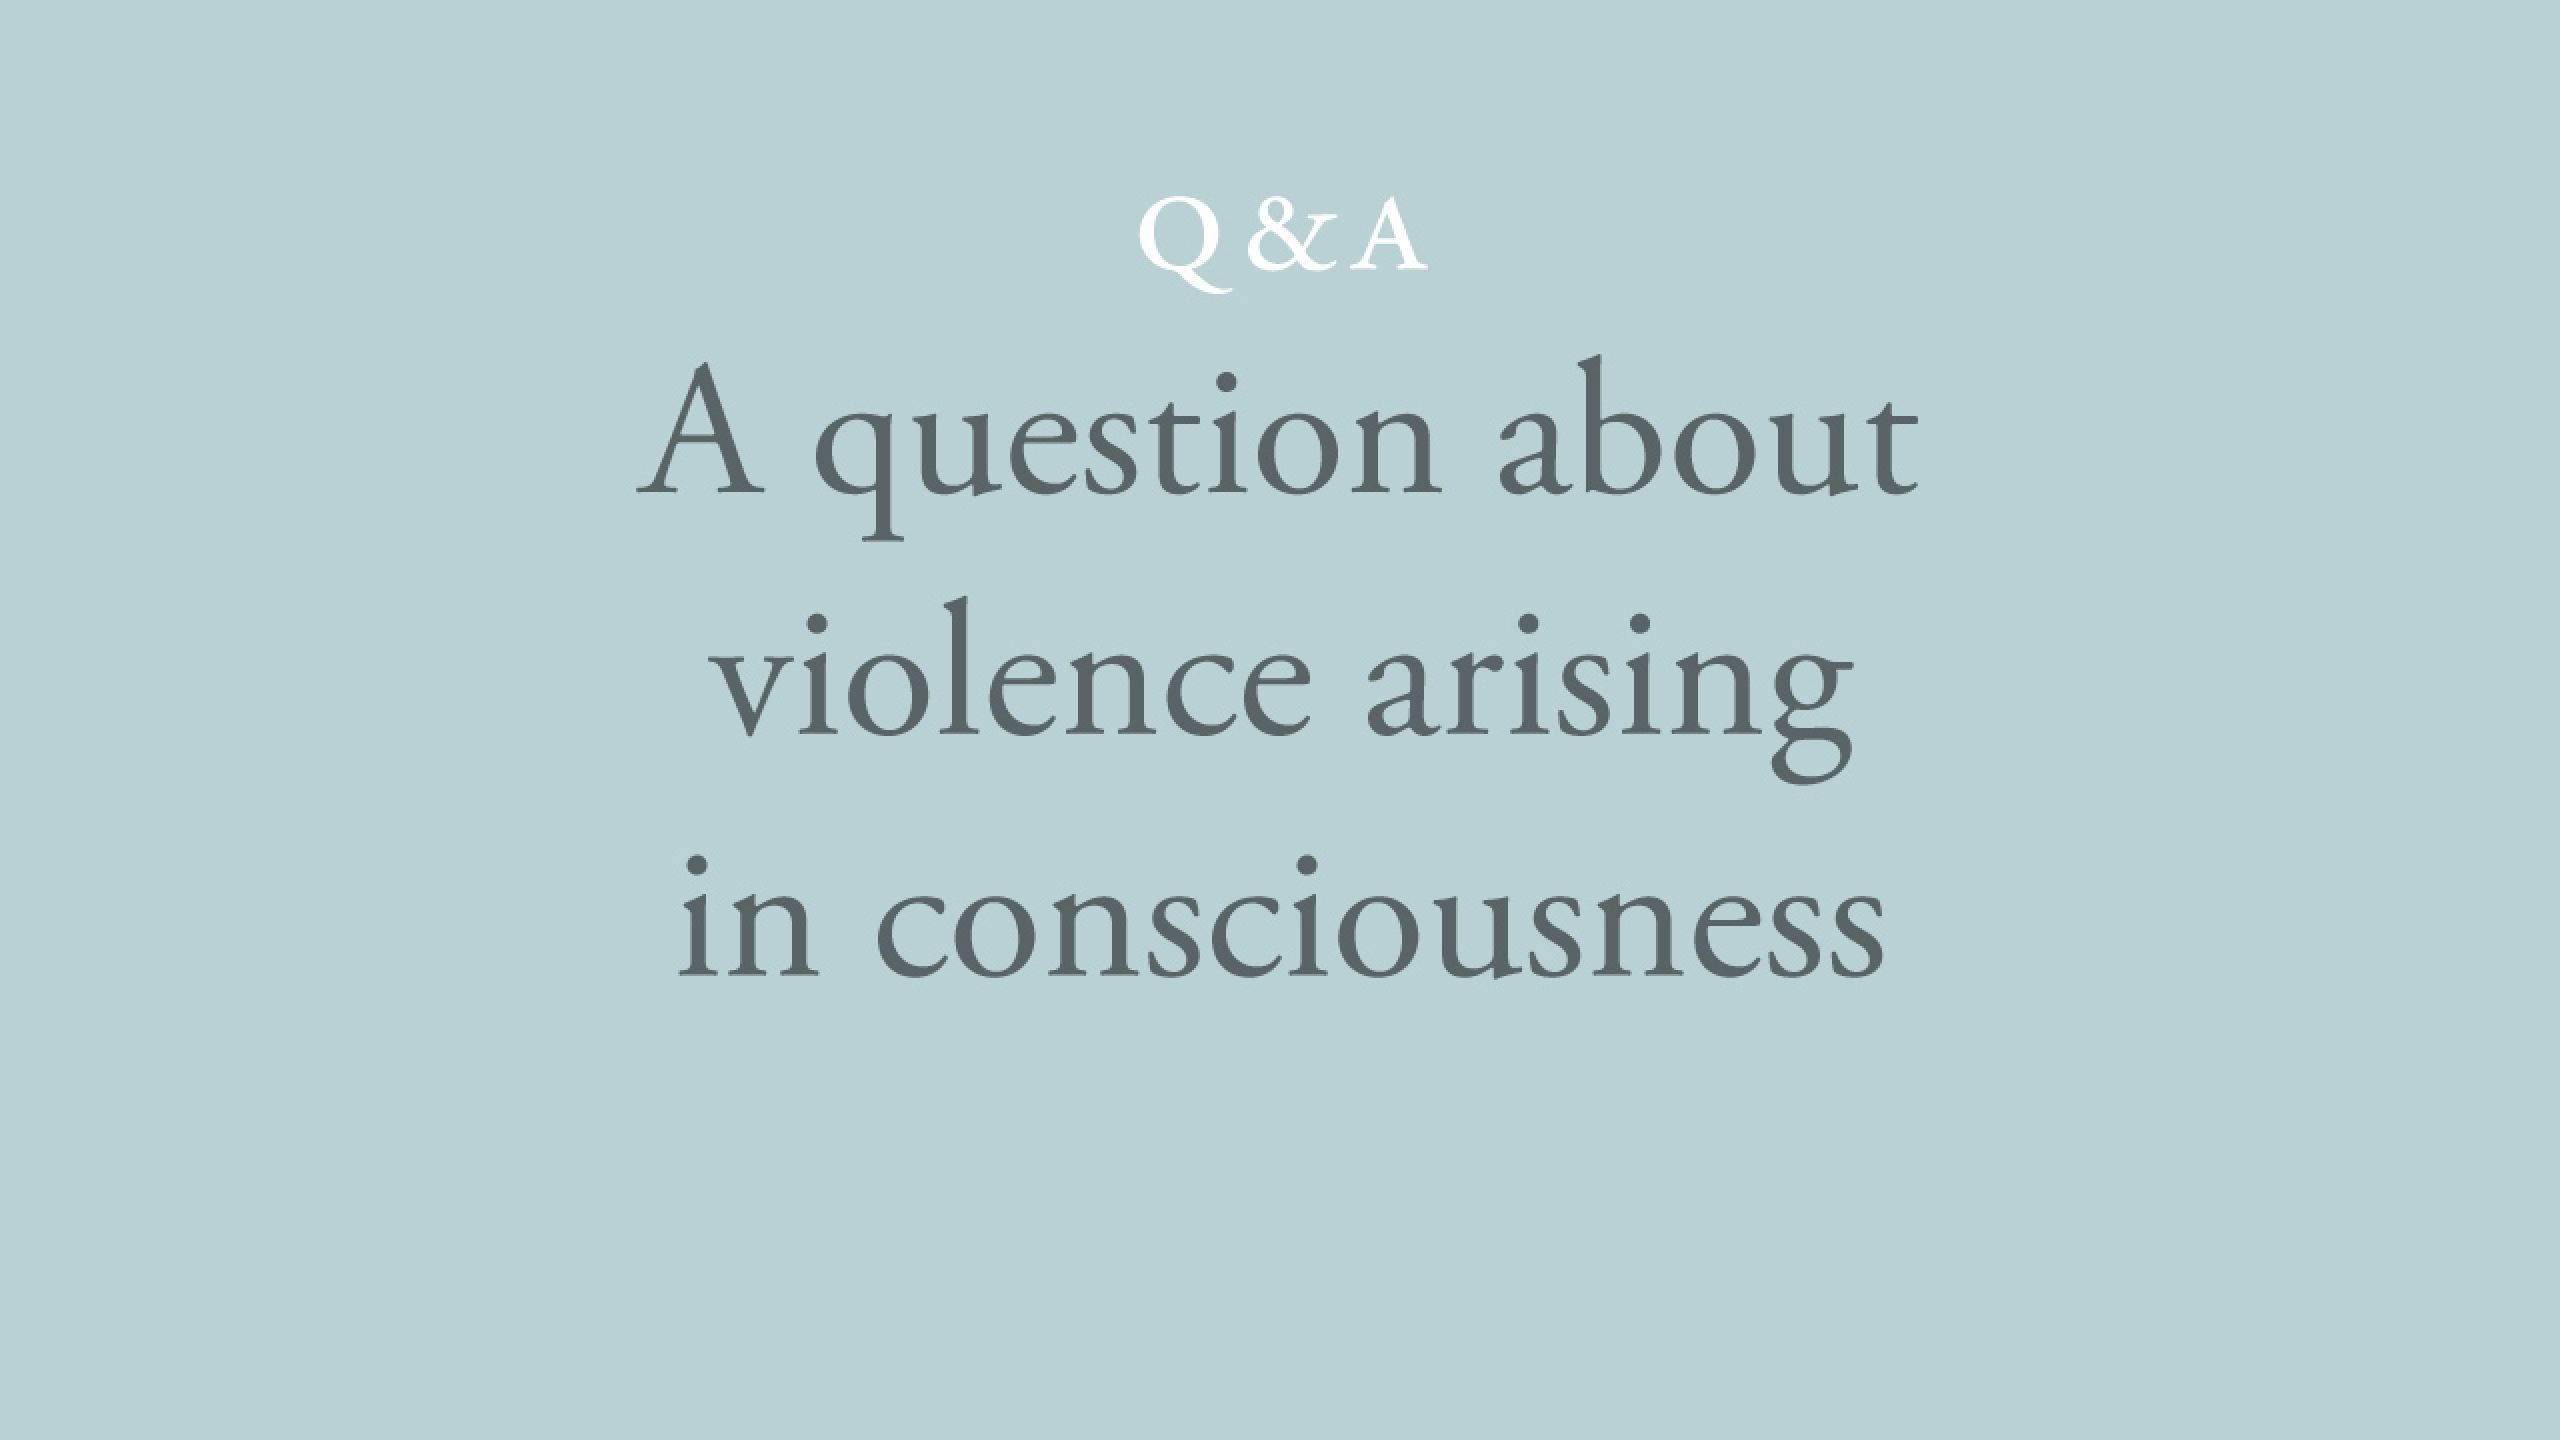 Why does consciousness manifest and allow abuse and violence?